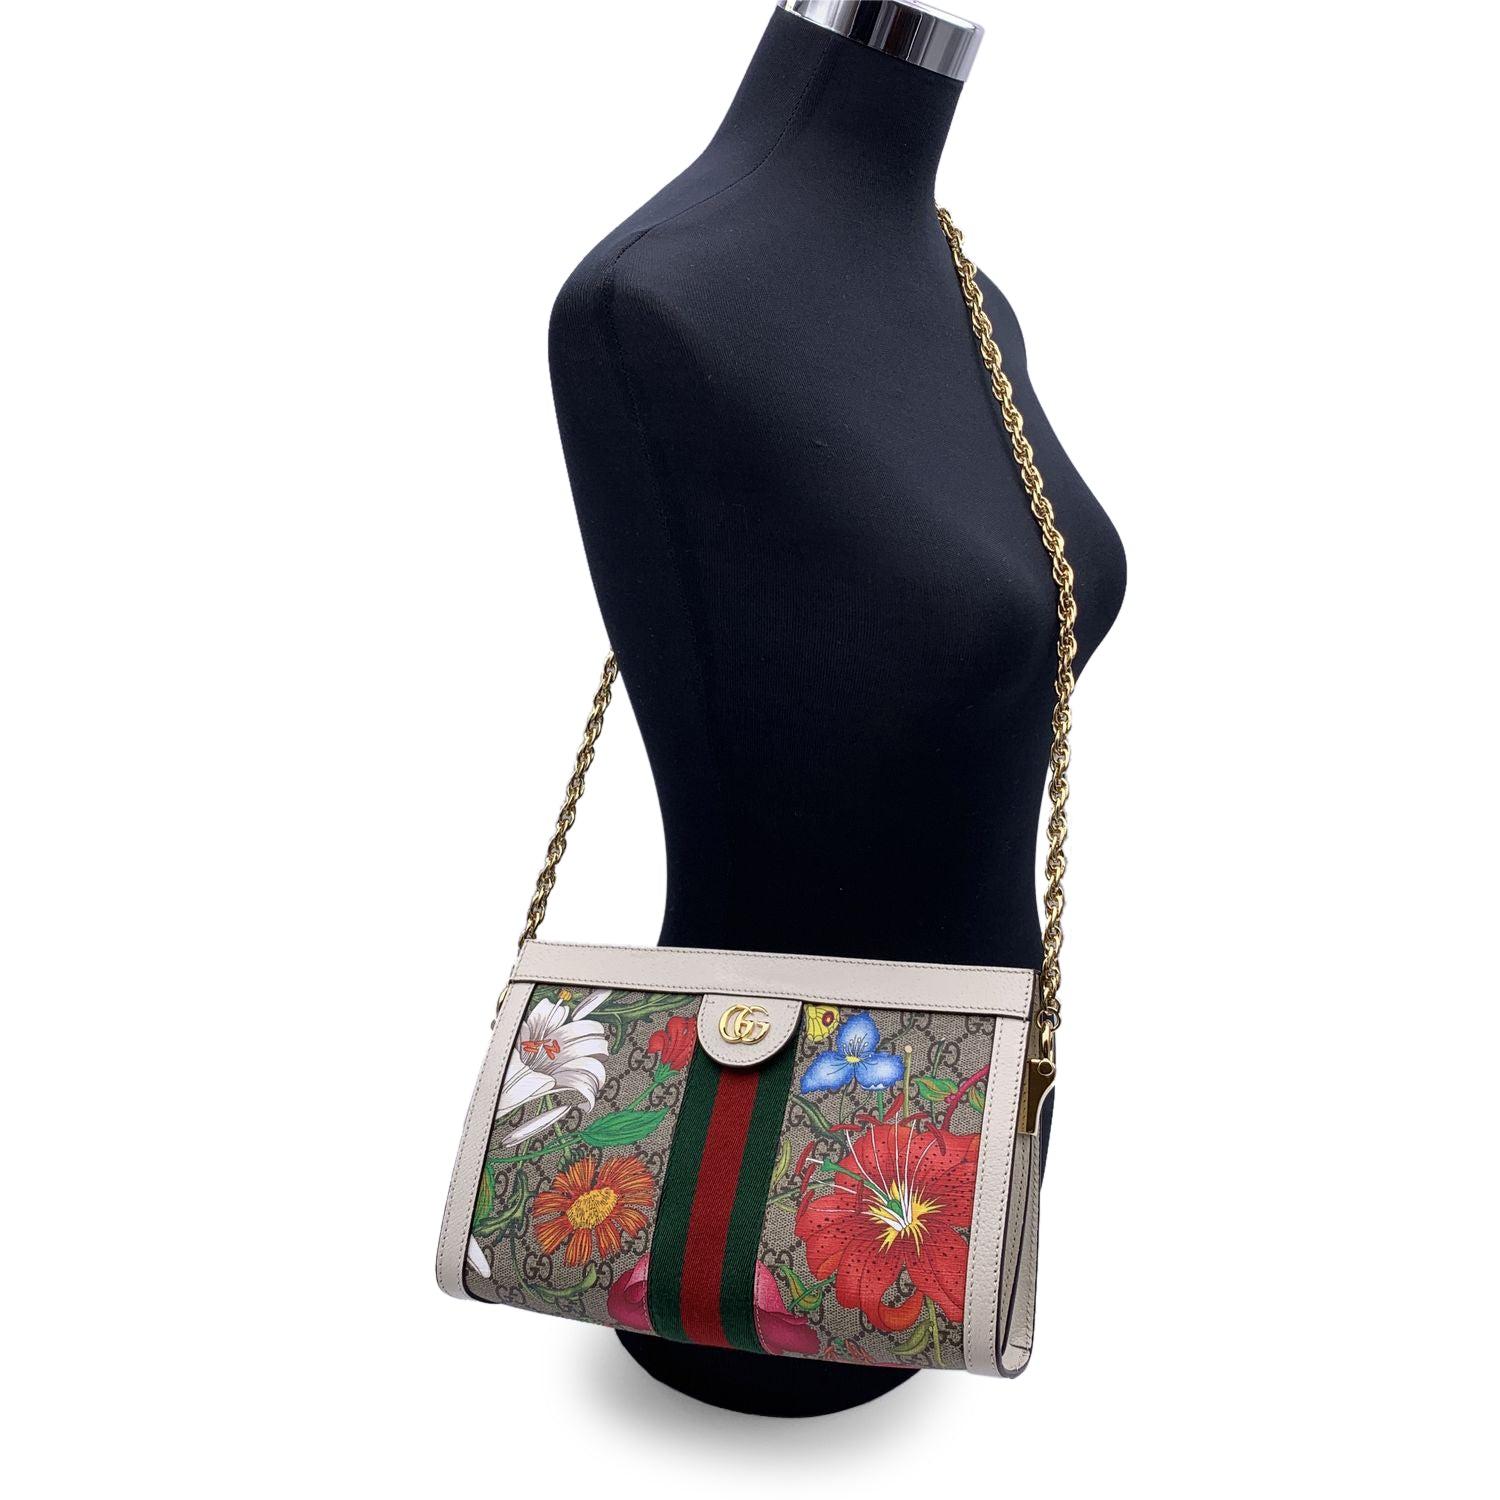 GUCCI Flora Ophidia Shoulder Bag. The bag is crafted of beige GG Supreme monogram canvas with Floral print. White leather trim. It features gold metal GG logo on the front and green/red/green stripes on the front and on the back. It features a gold